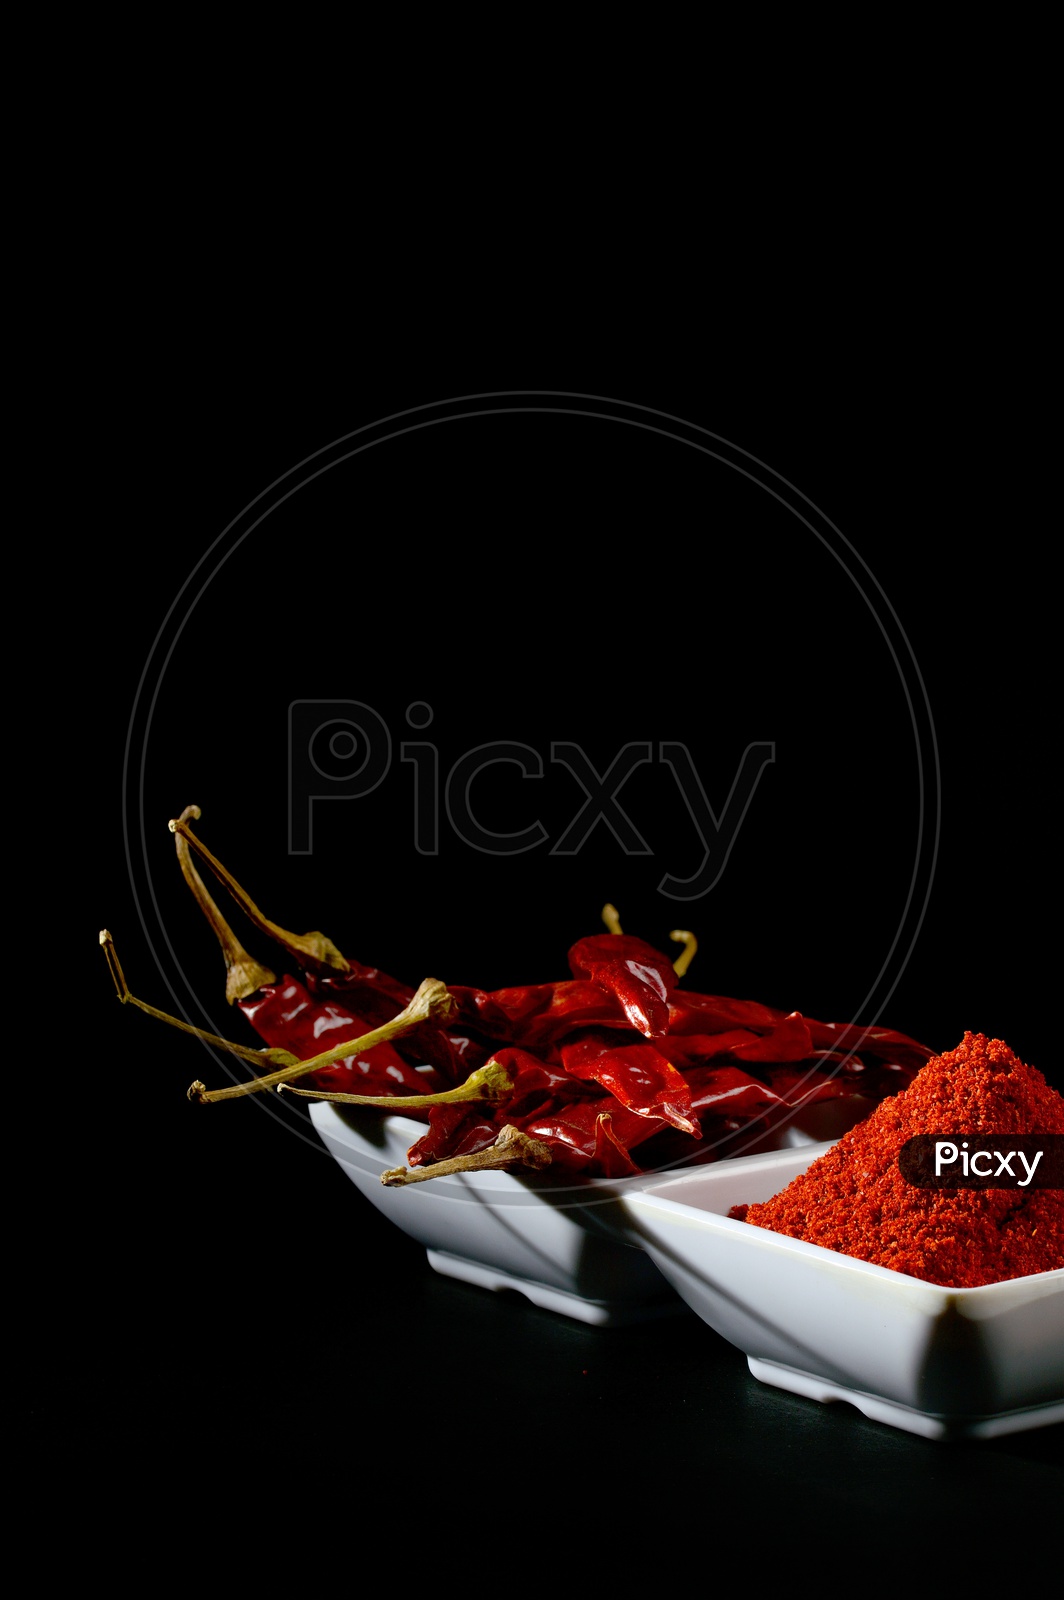 chilly powder with red chilly in white plate, dried chillies on black background